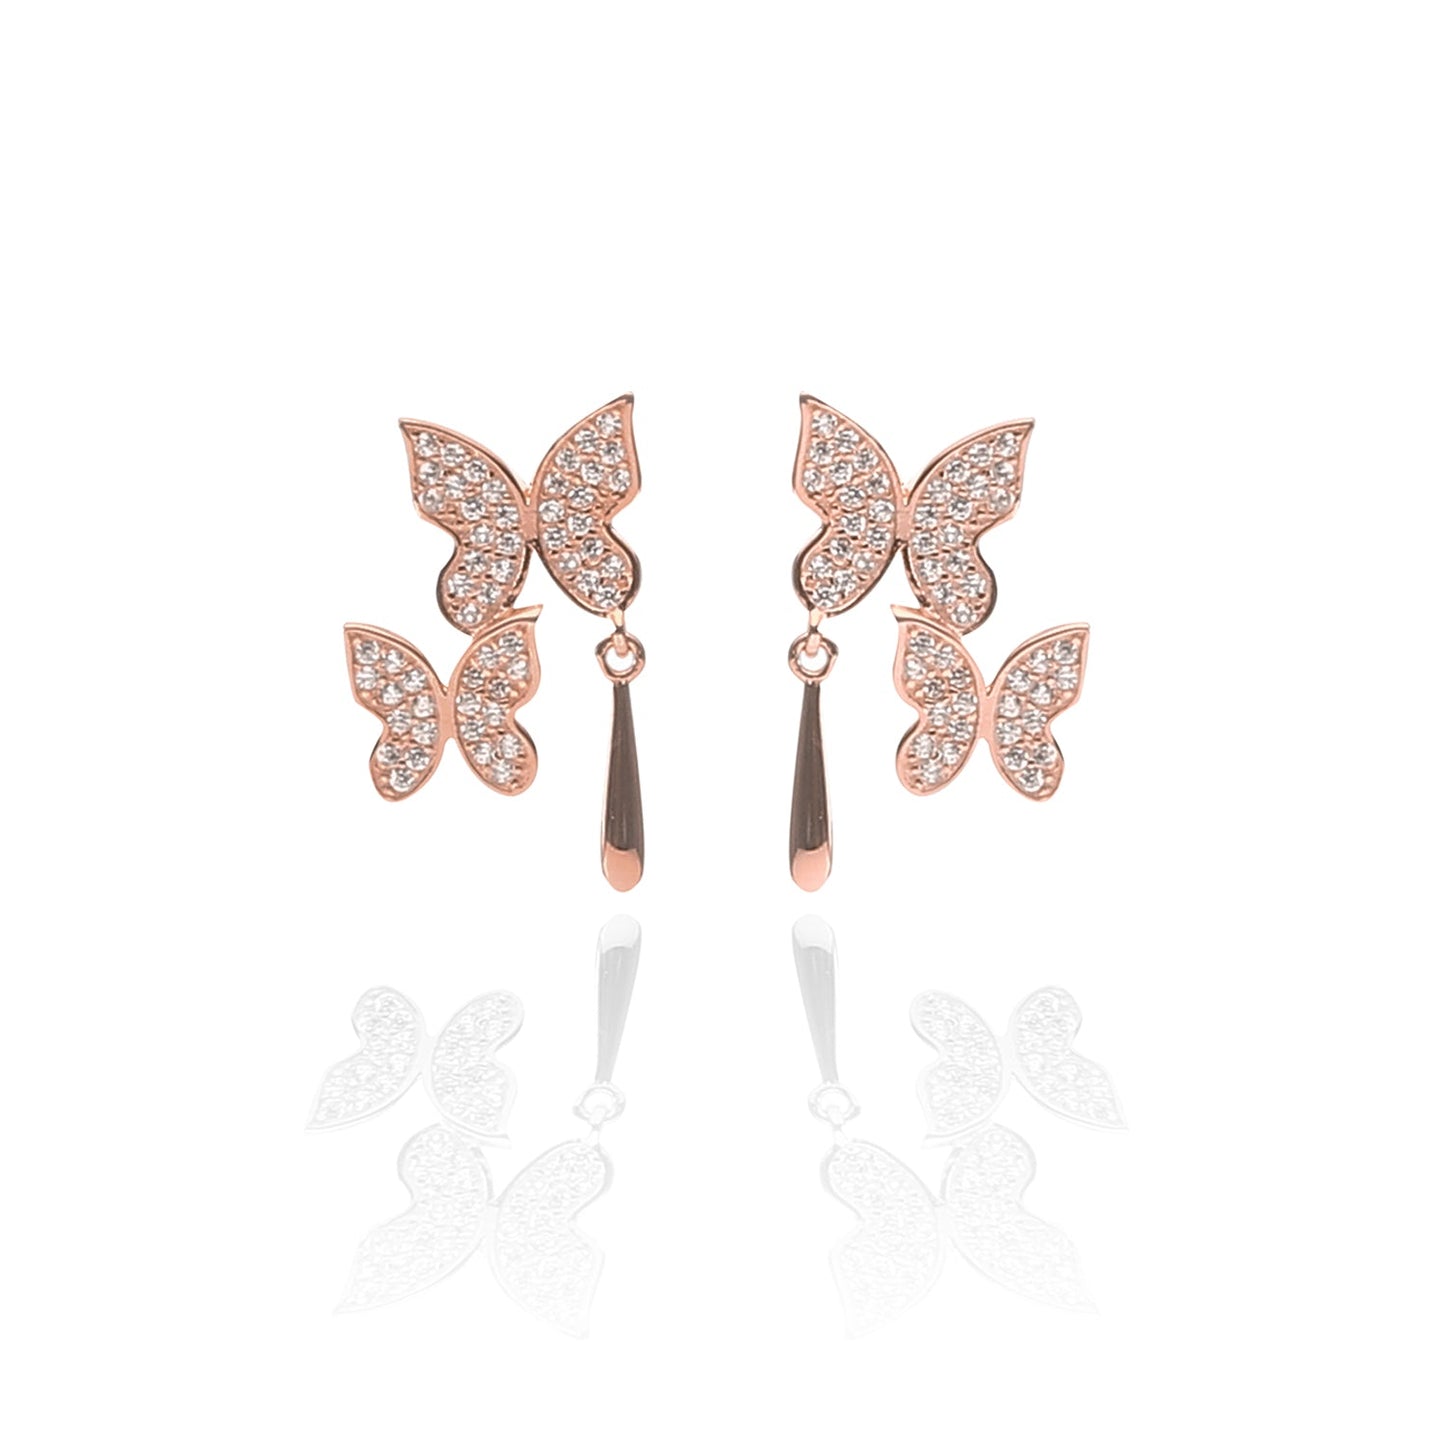 Butterfly Pendant Necklace and Earring Set - ARJW1017RG ARCADIO